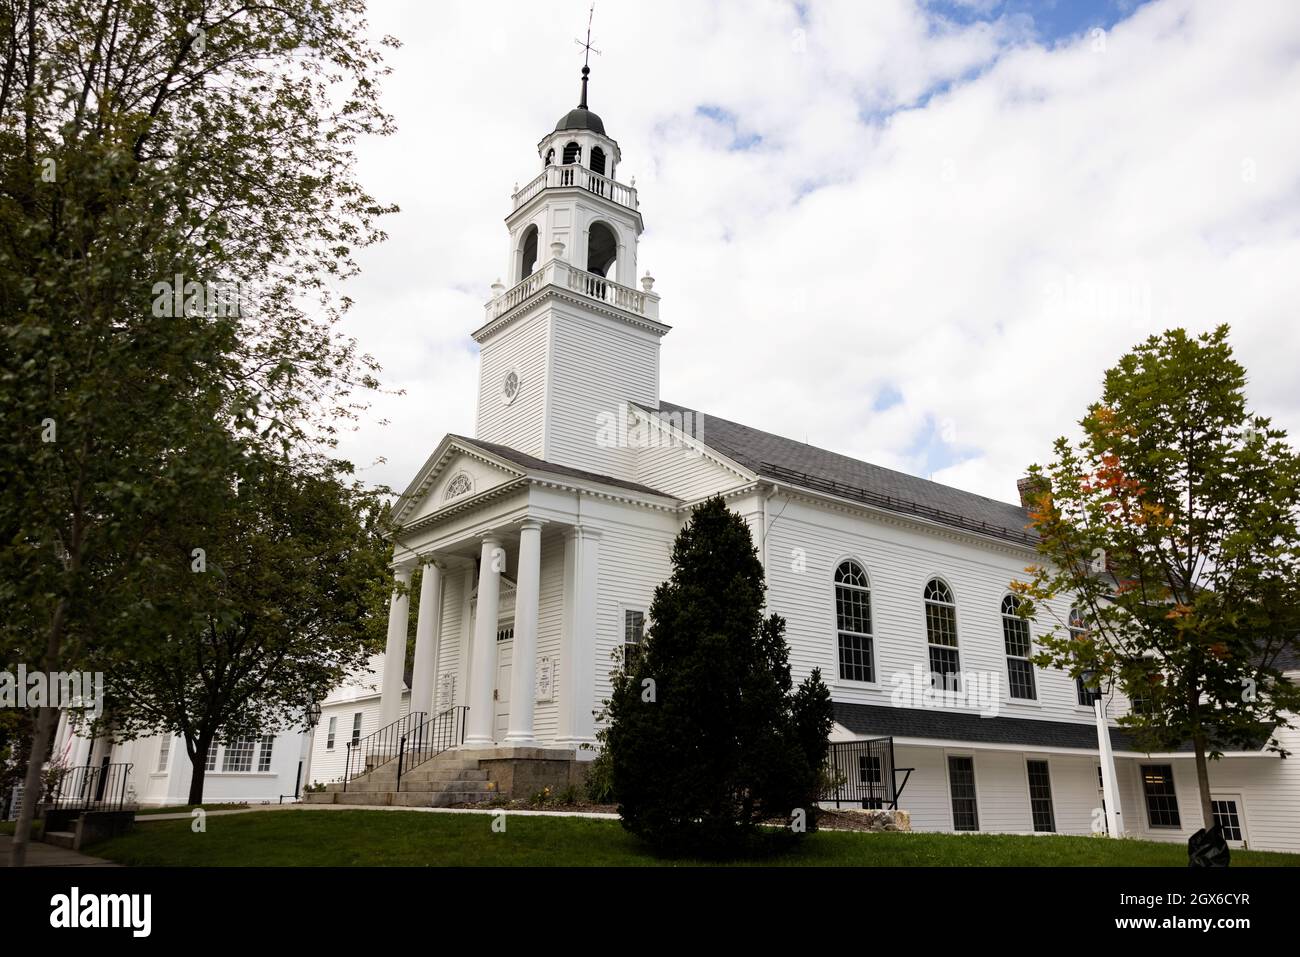 The Congregational church on Monument Square in the town center of Hollis, New Hampshire, USA. Stock Photo